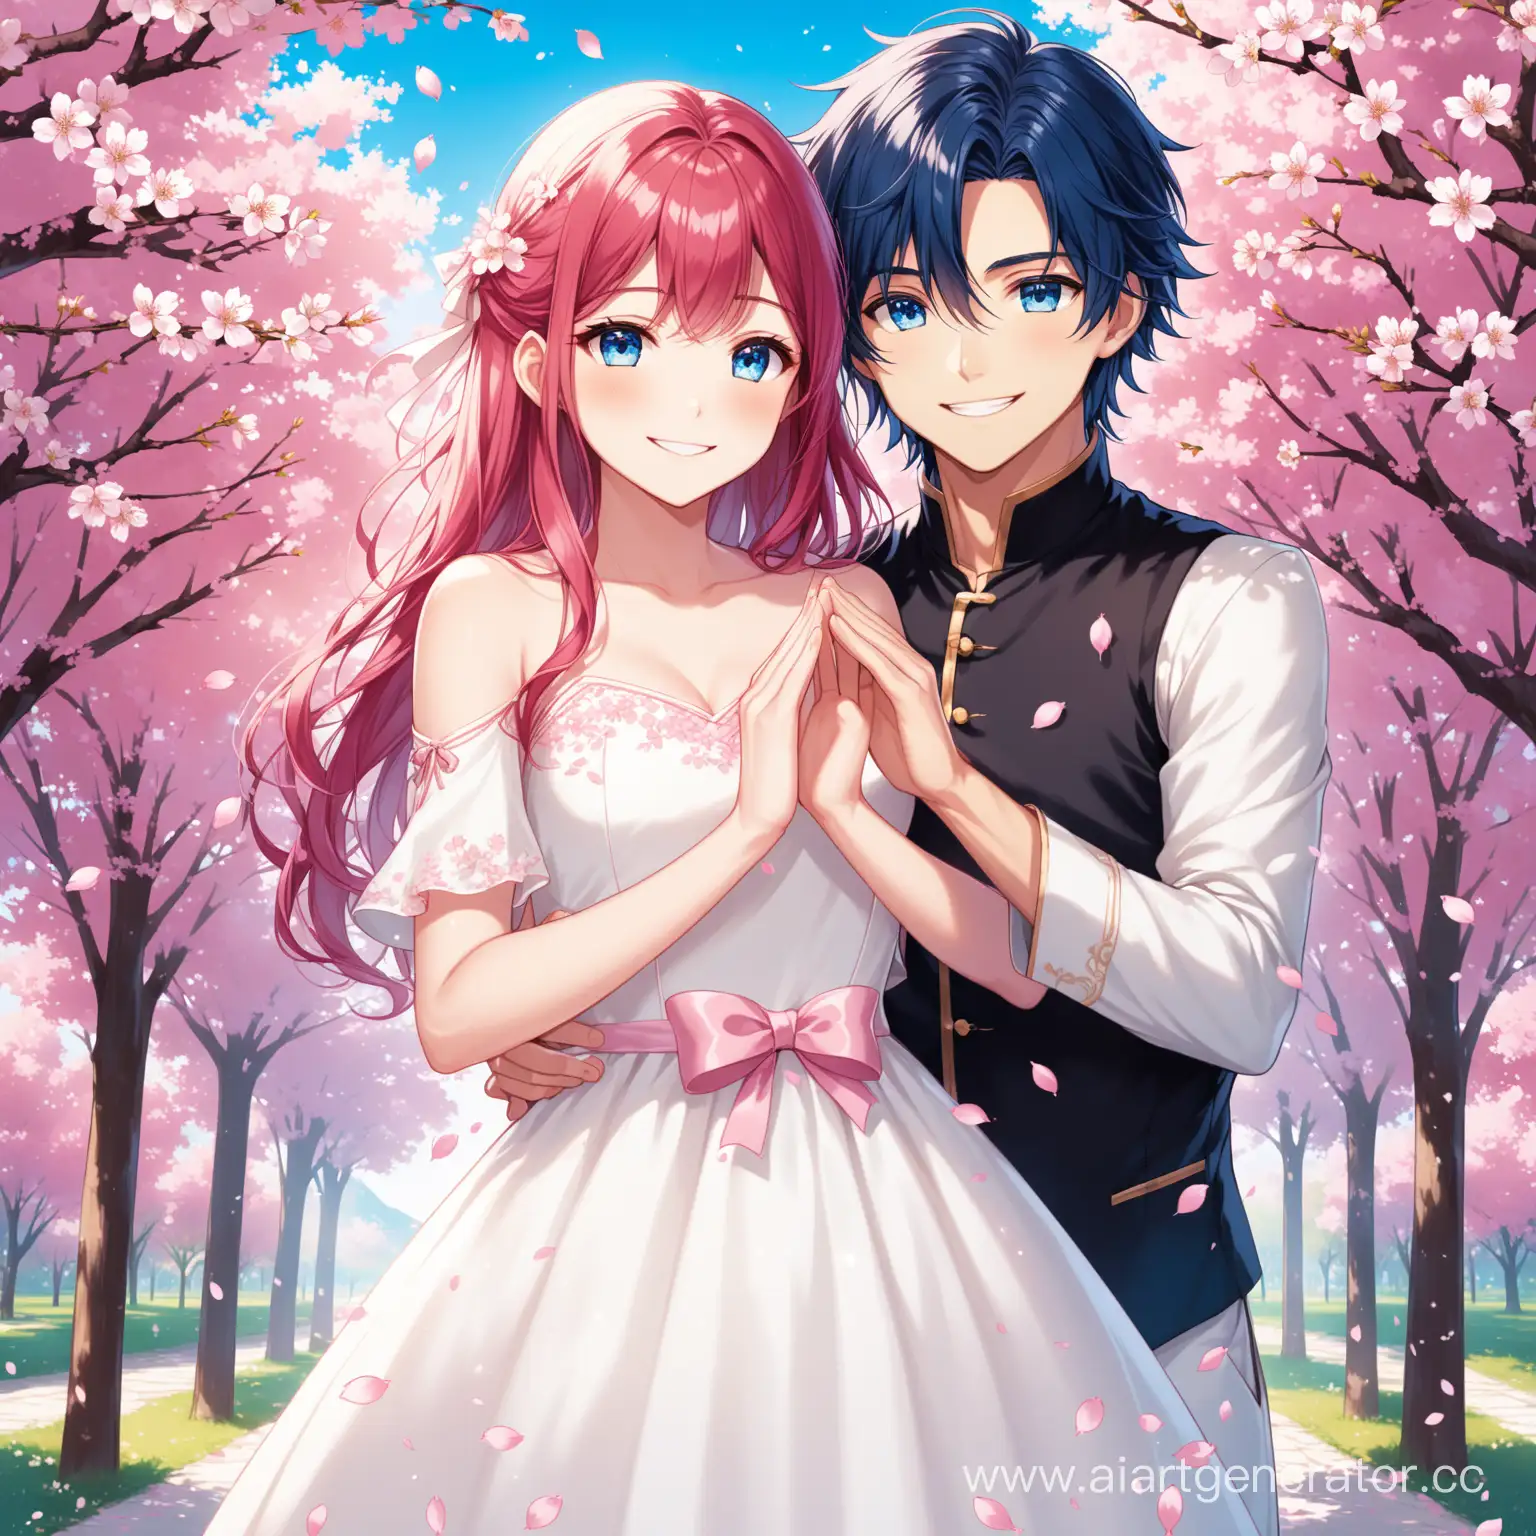 Sister-with-Rosy-Hair-and-Guy-with-Dark-Blue-Hair-Holding-Cherry-Blossom-Petals